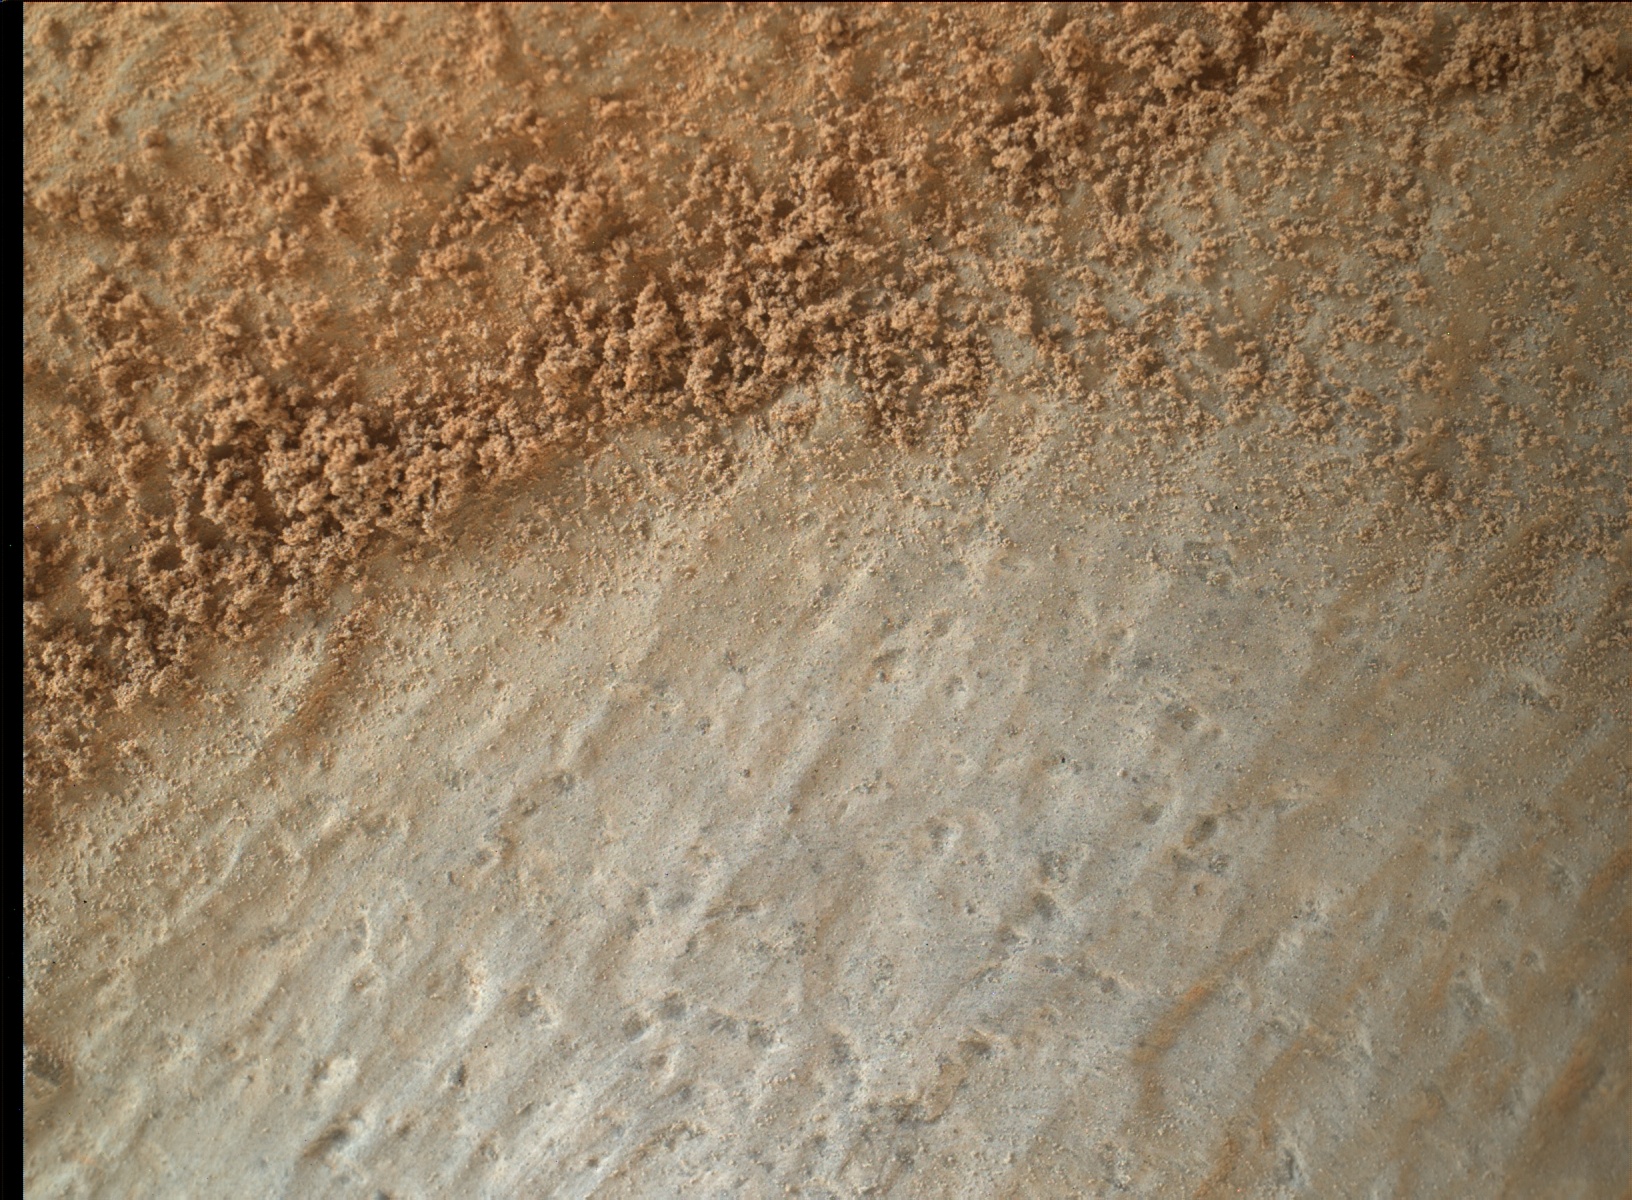 Nasa's Mars rover Curiosity acquired this image using its Mars Hand Lens Imager (MAHLI) on Sol 815